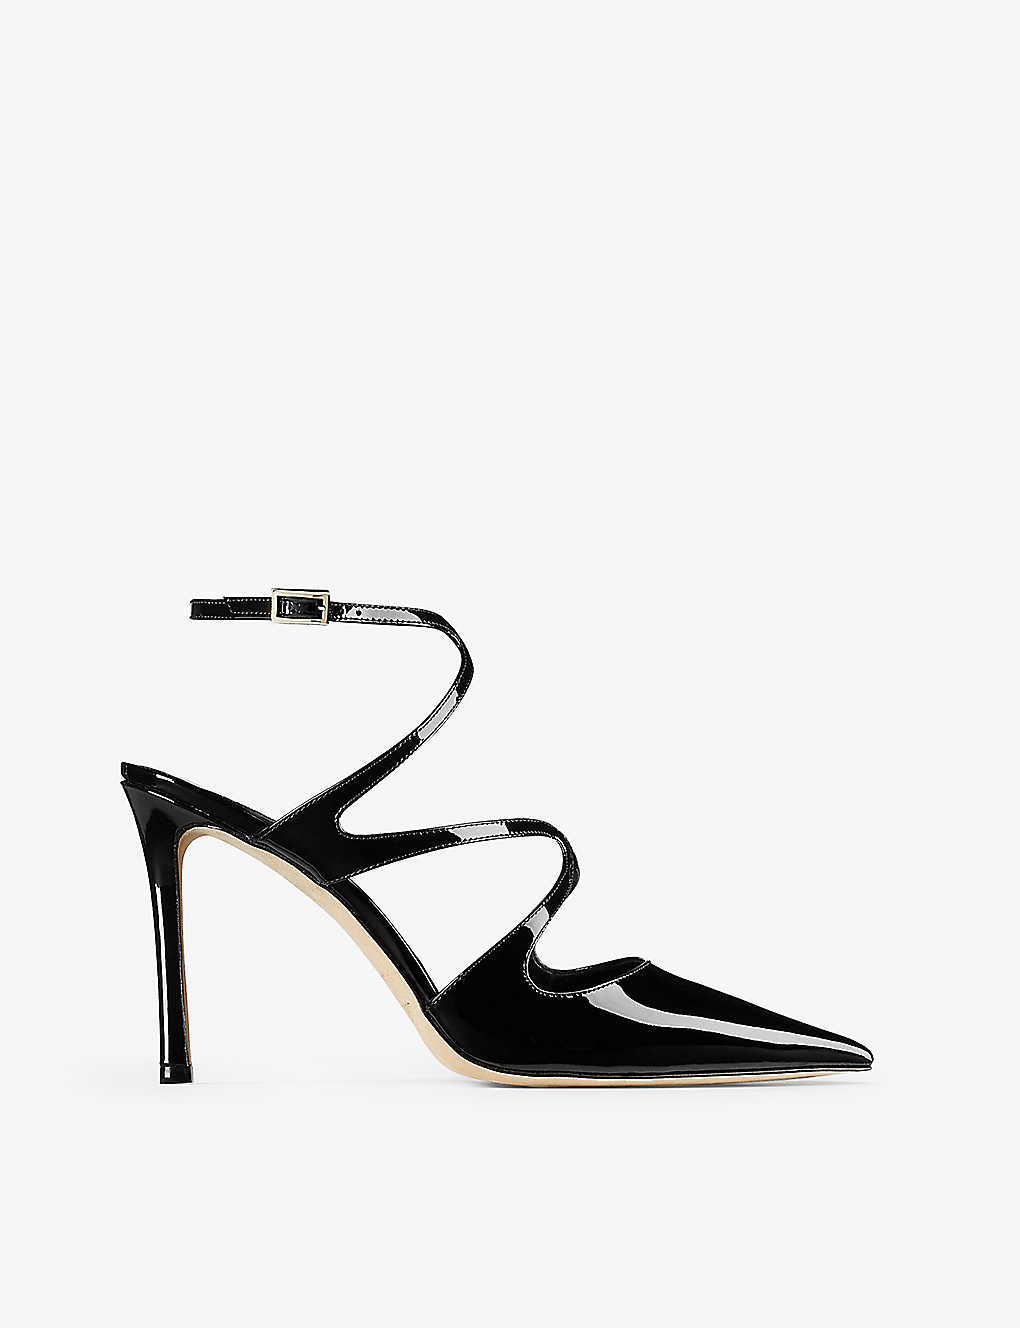 Shop Jimmy Choo Womens Black Azia 95 Pointed-toe Patent-leather Heeled Pumps